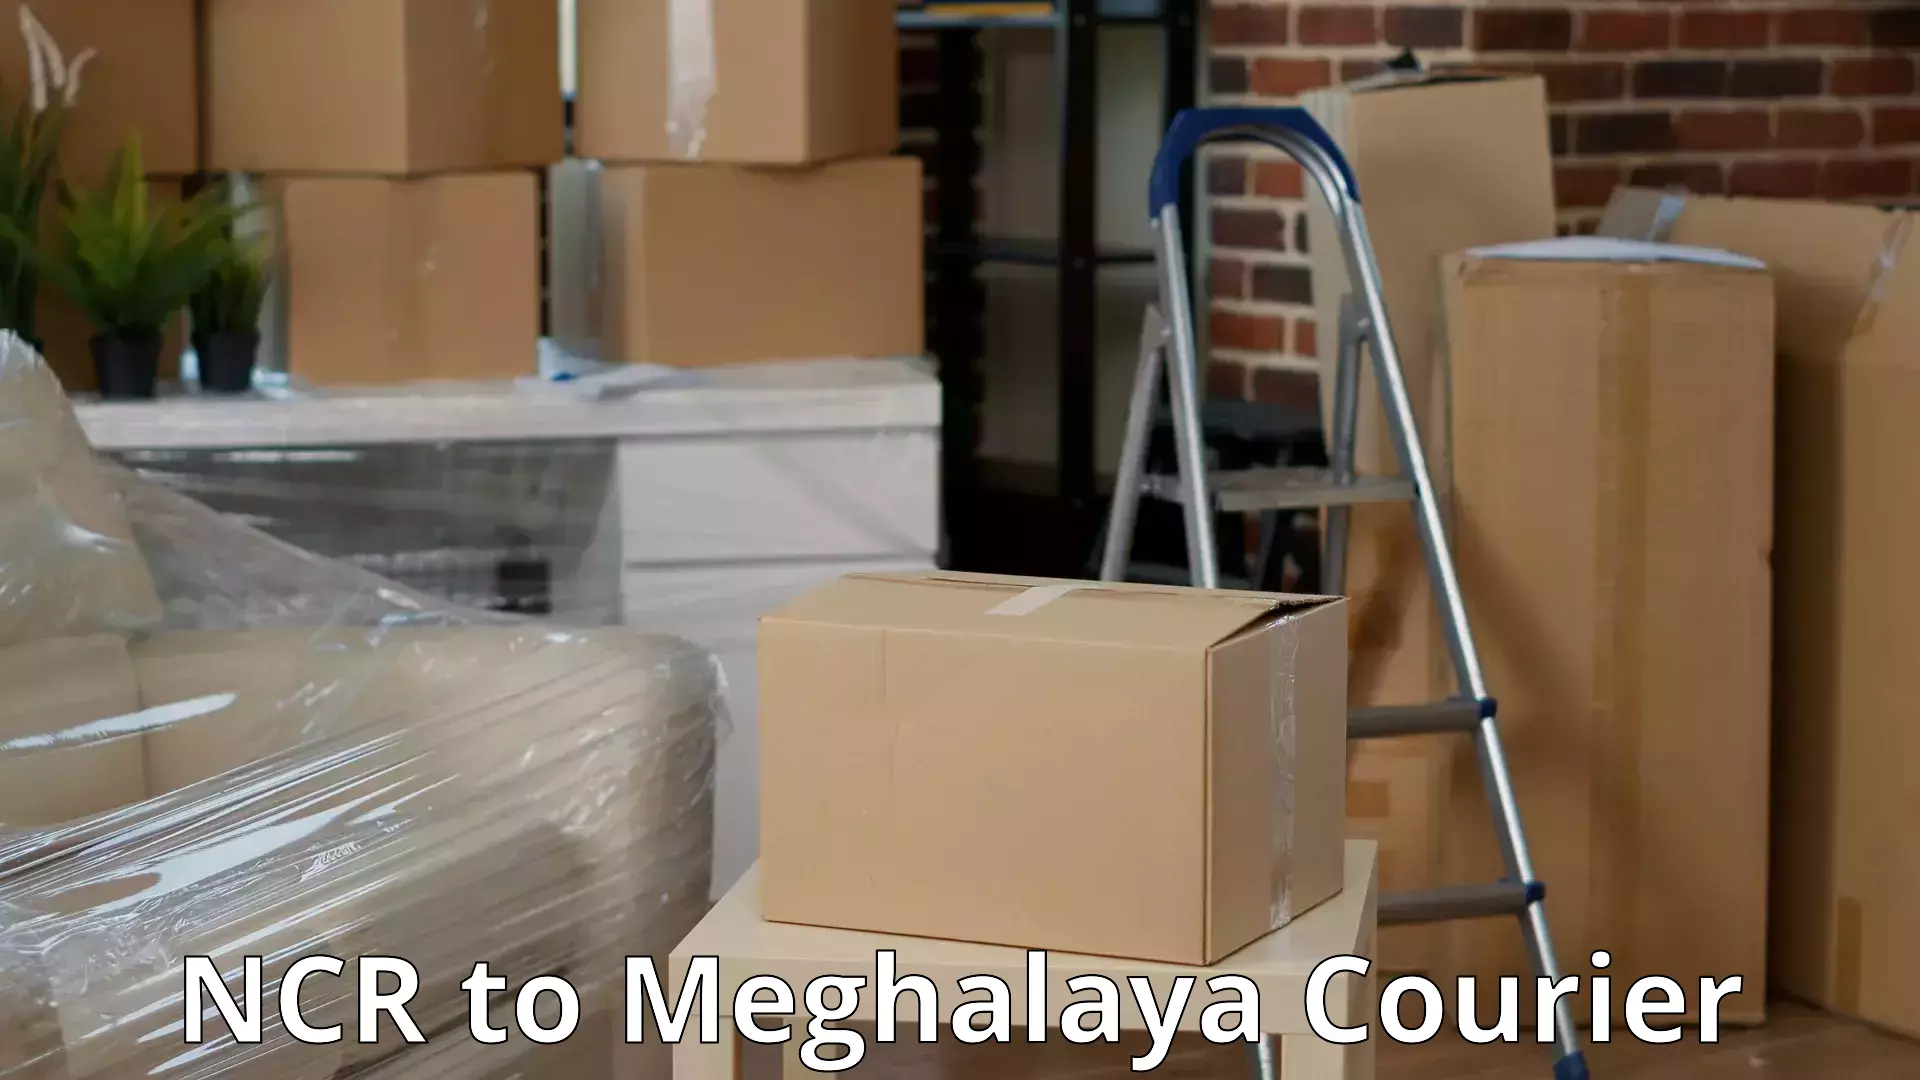 Quality relocation services NCR to Meghalaya